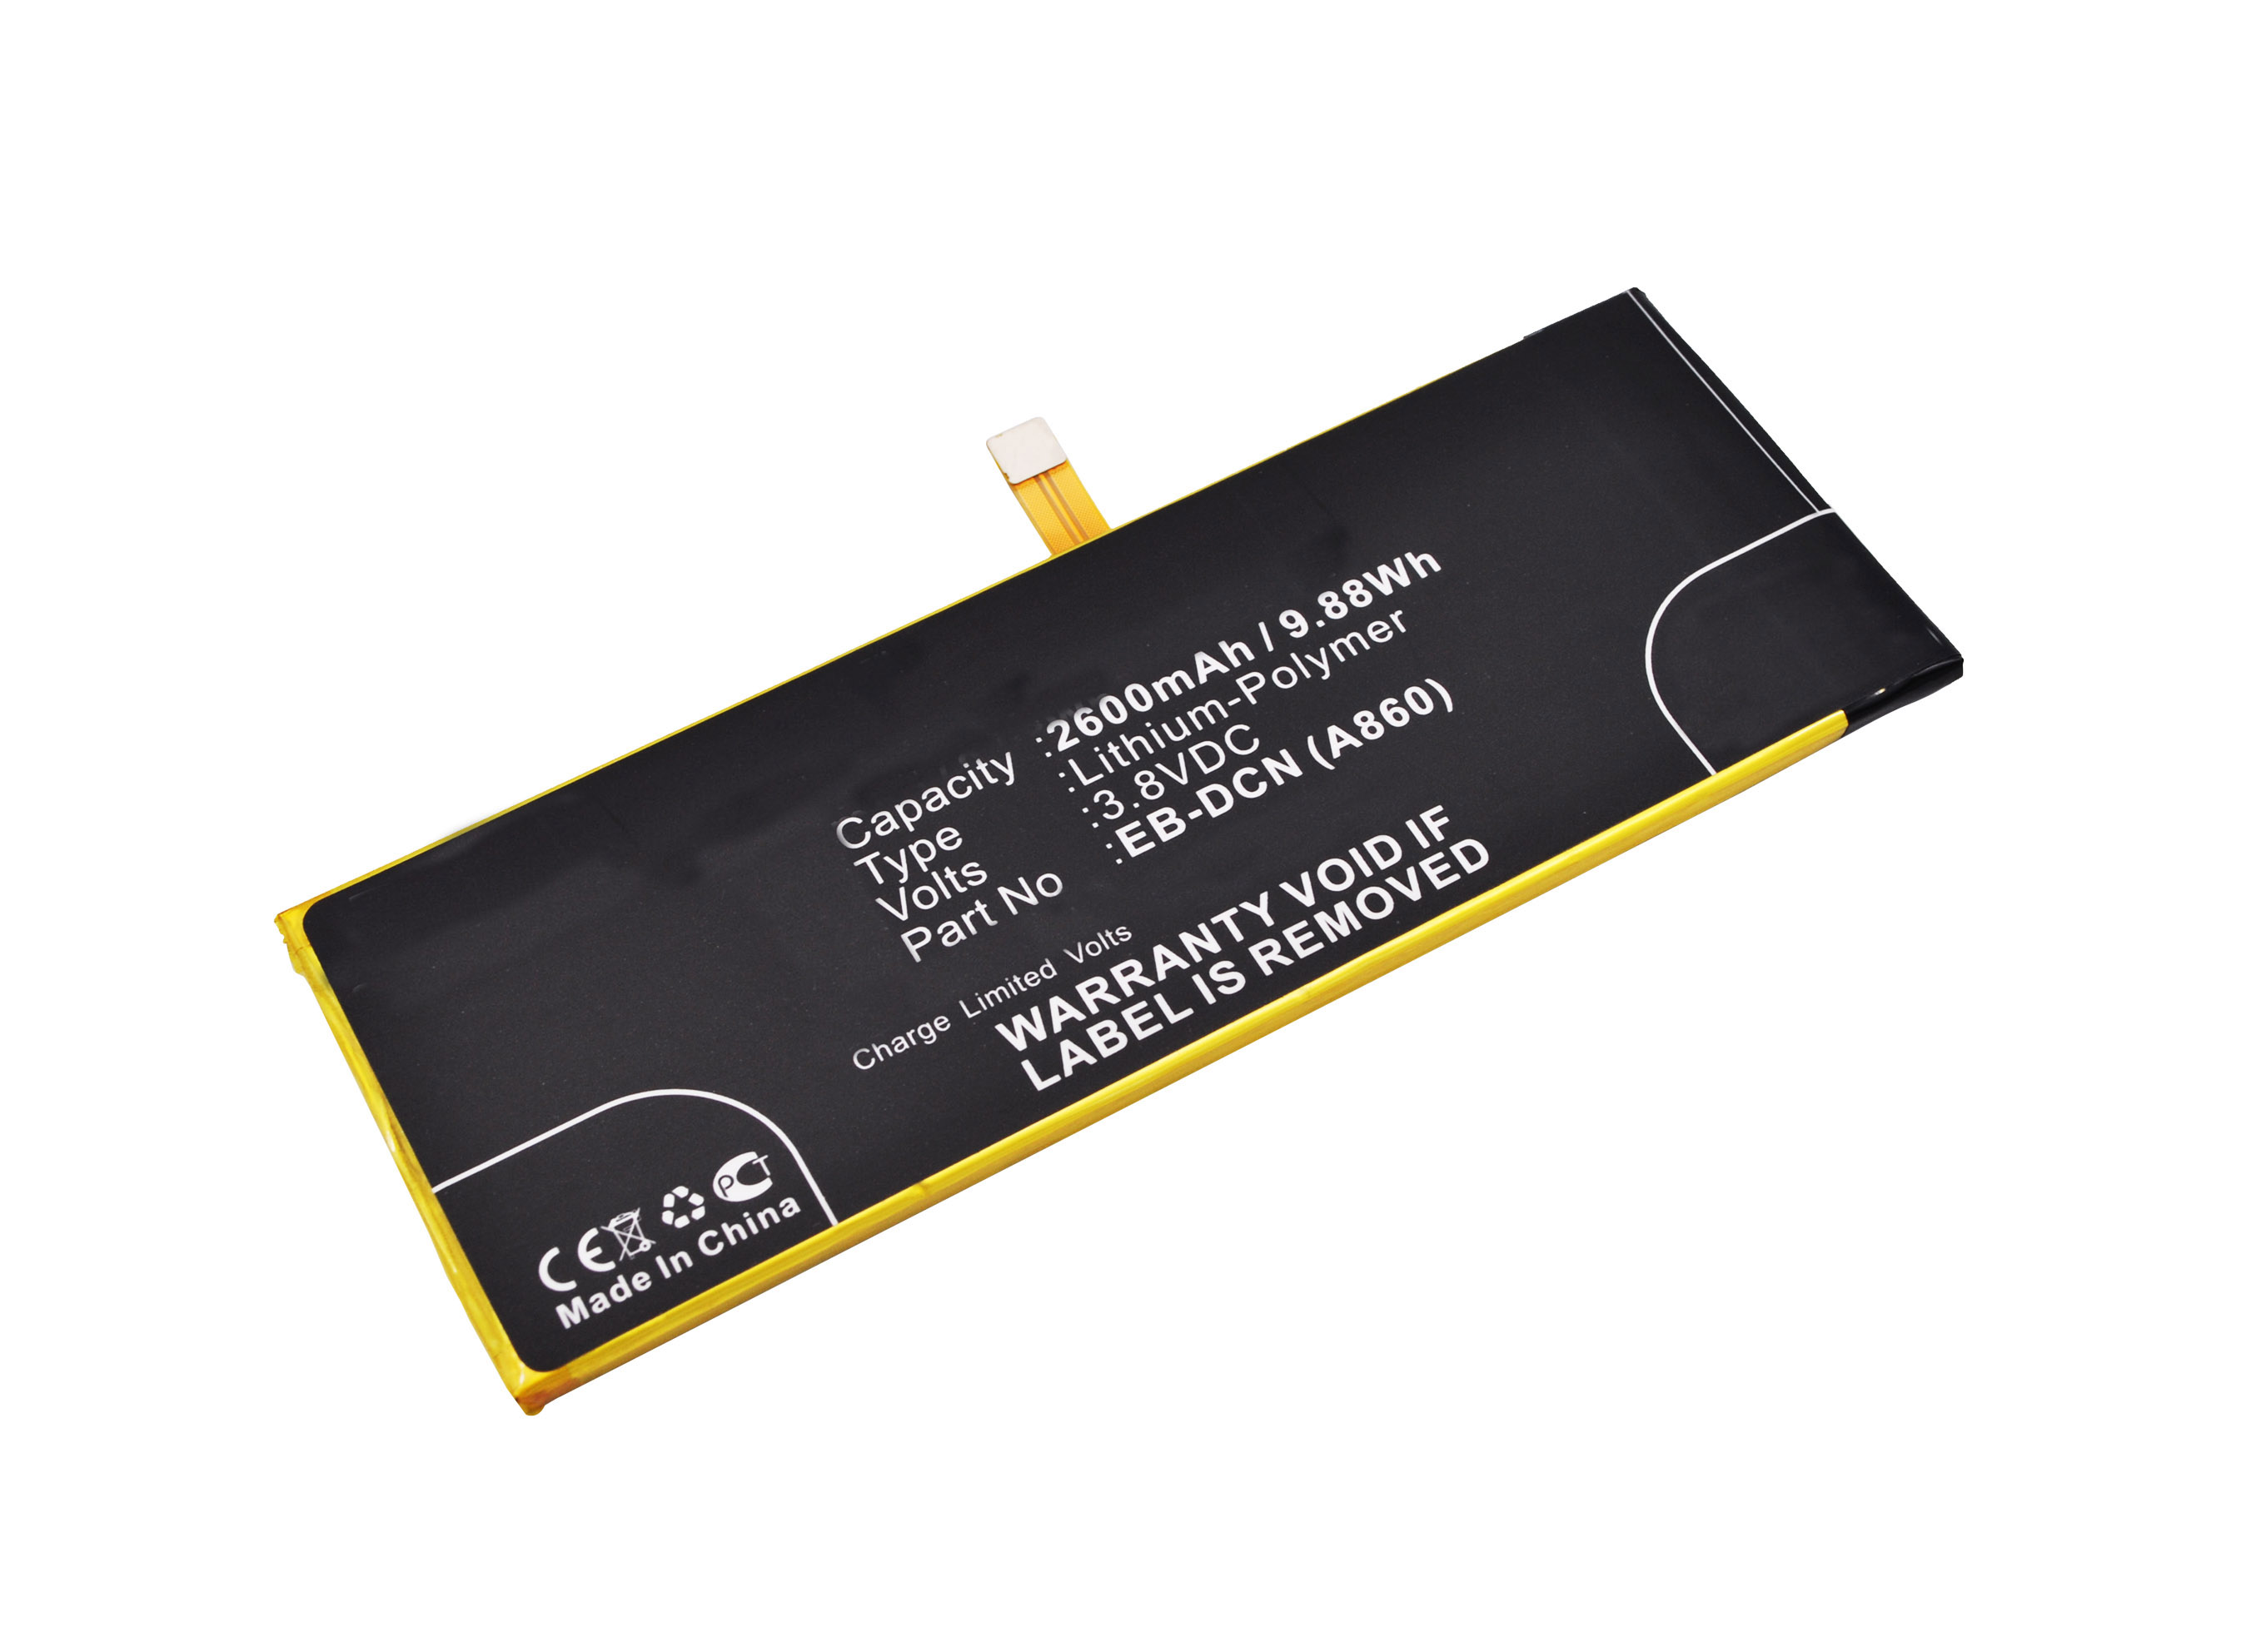 Synergy Digital Cell Phone Battery, Compatible with EBest EB-DCN (A860) Cell Phone Battery (3.8V, Li-Pol, 2600mAh)